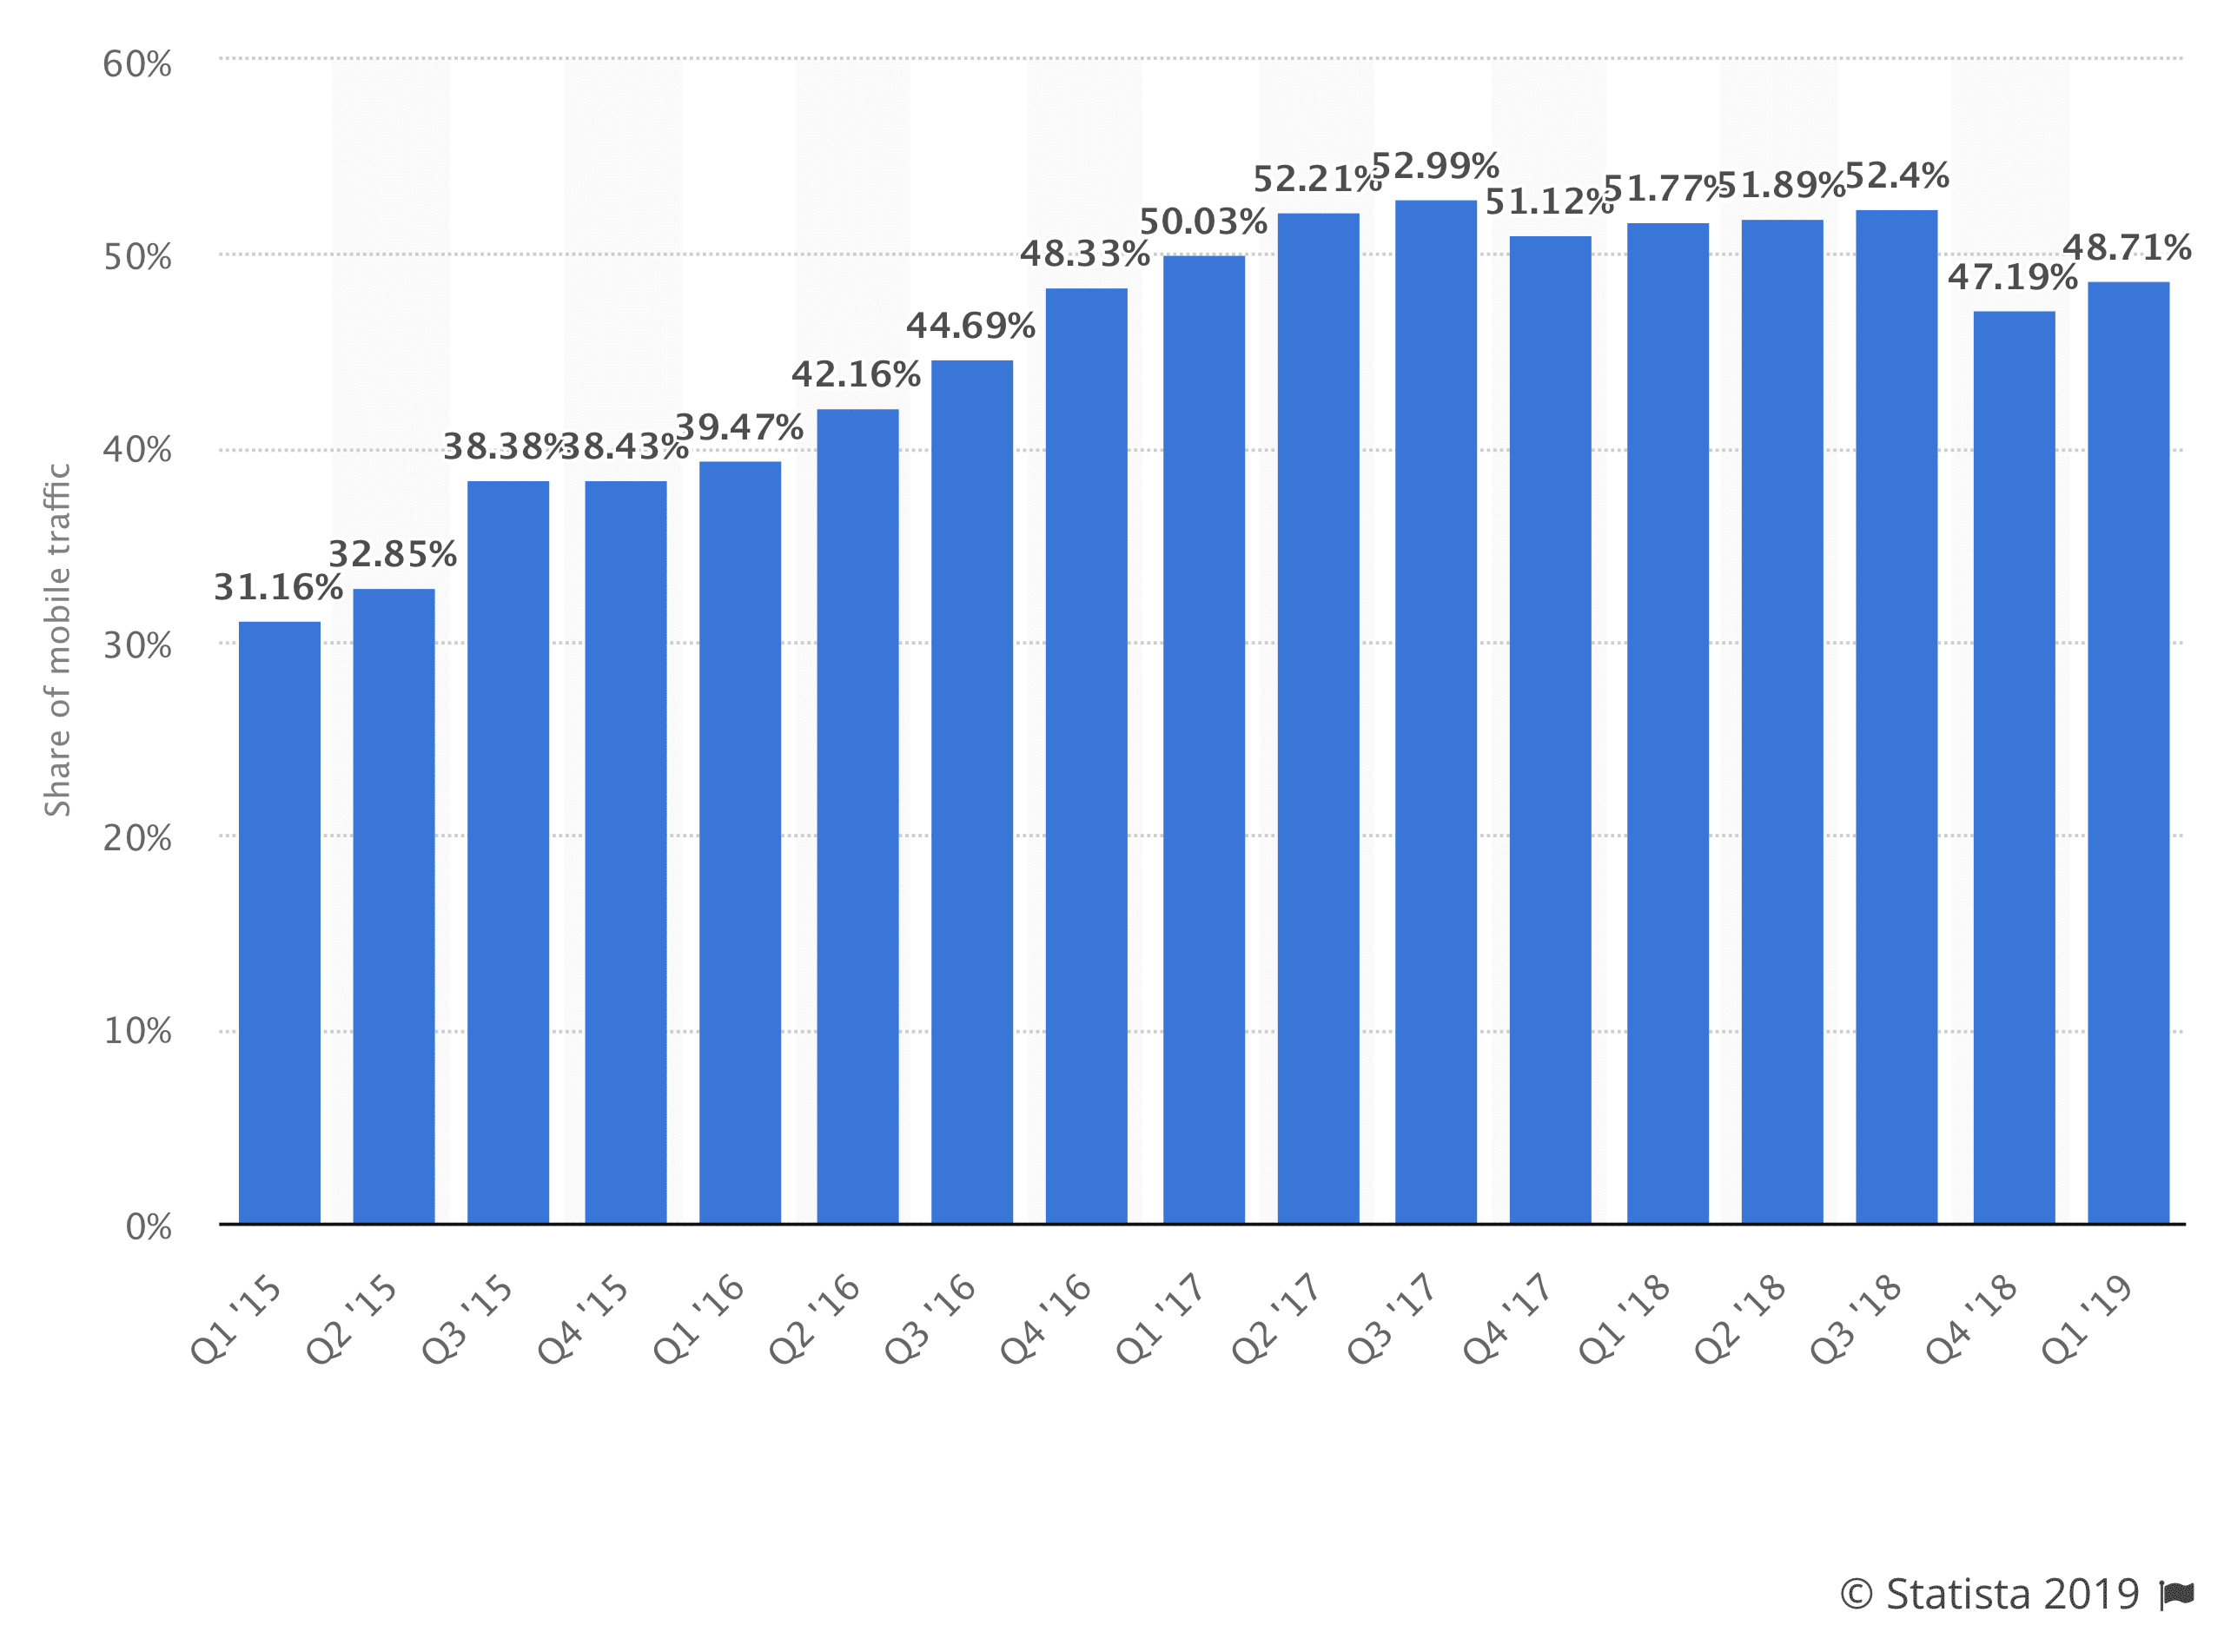 Percentage of mobile device website traffic worldwide from 1st quarter 2015 to 1st quarter 2019